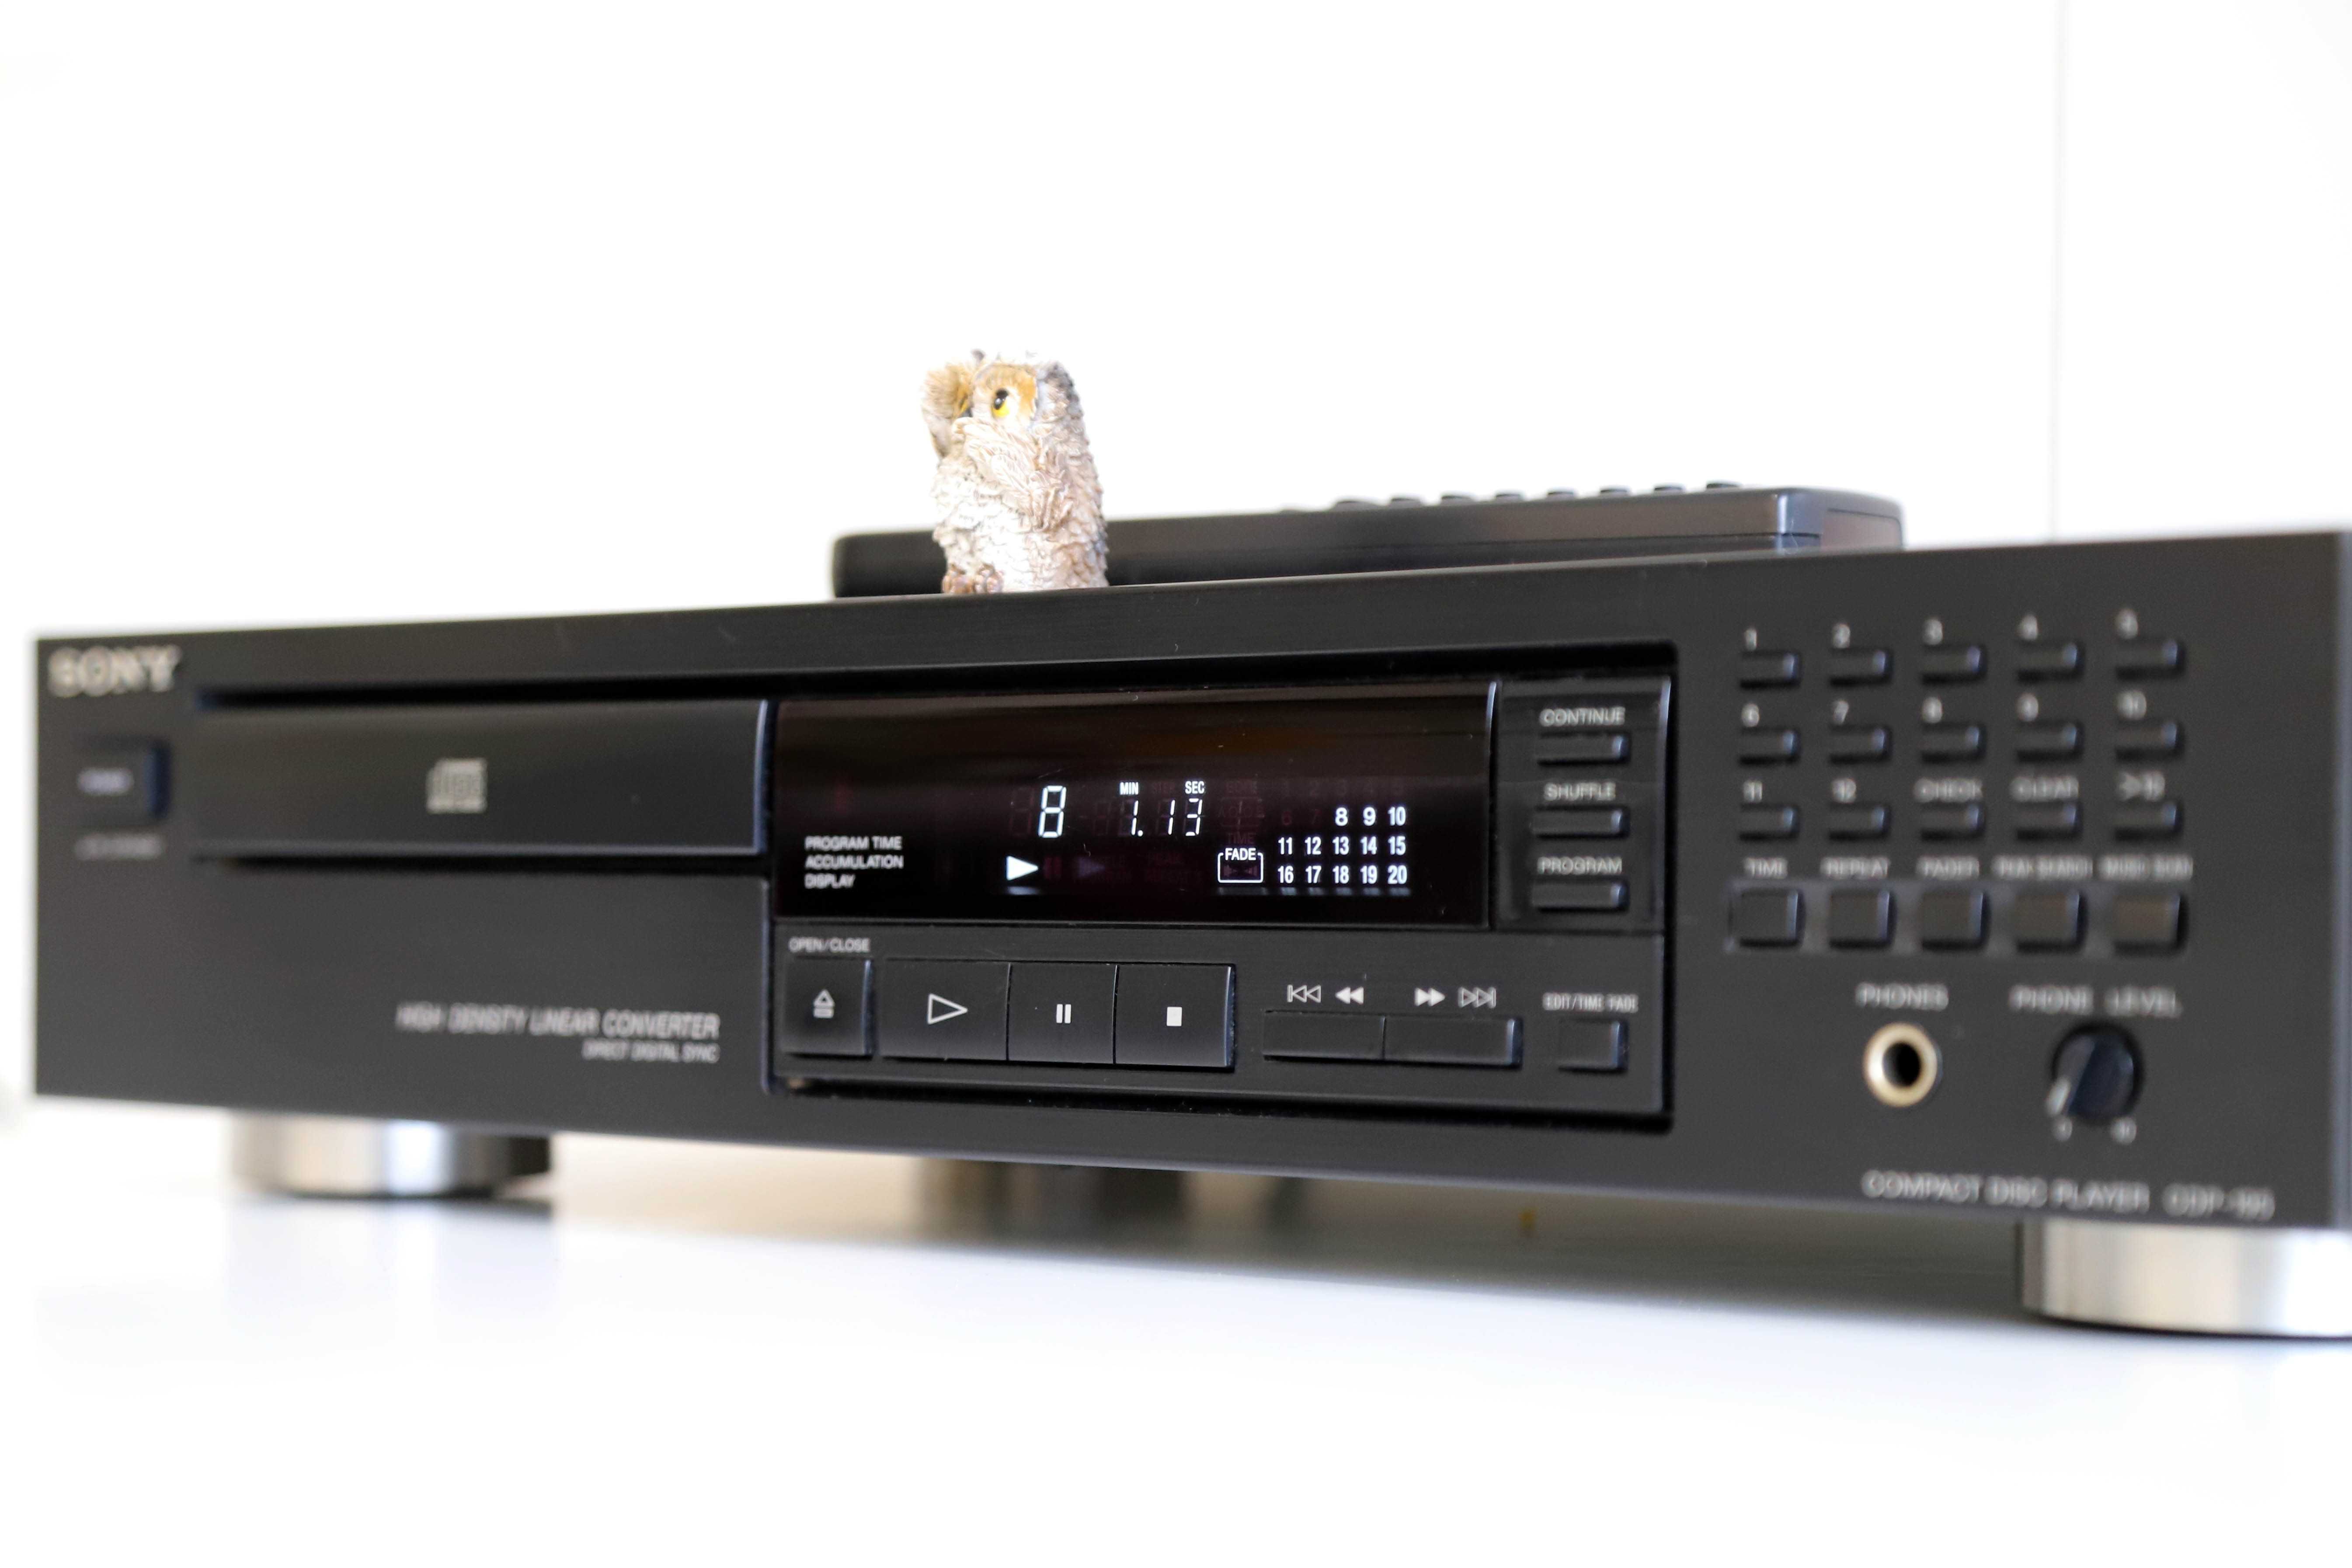 Sony CDP-195 Compact Disc Player